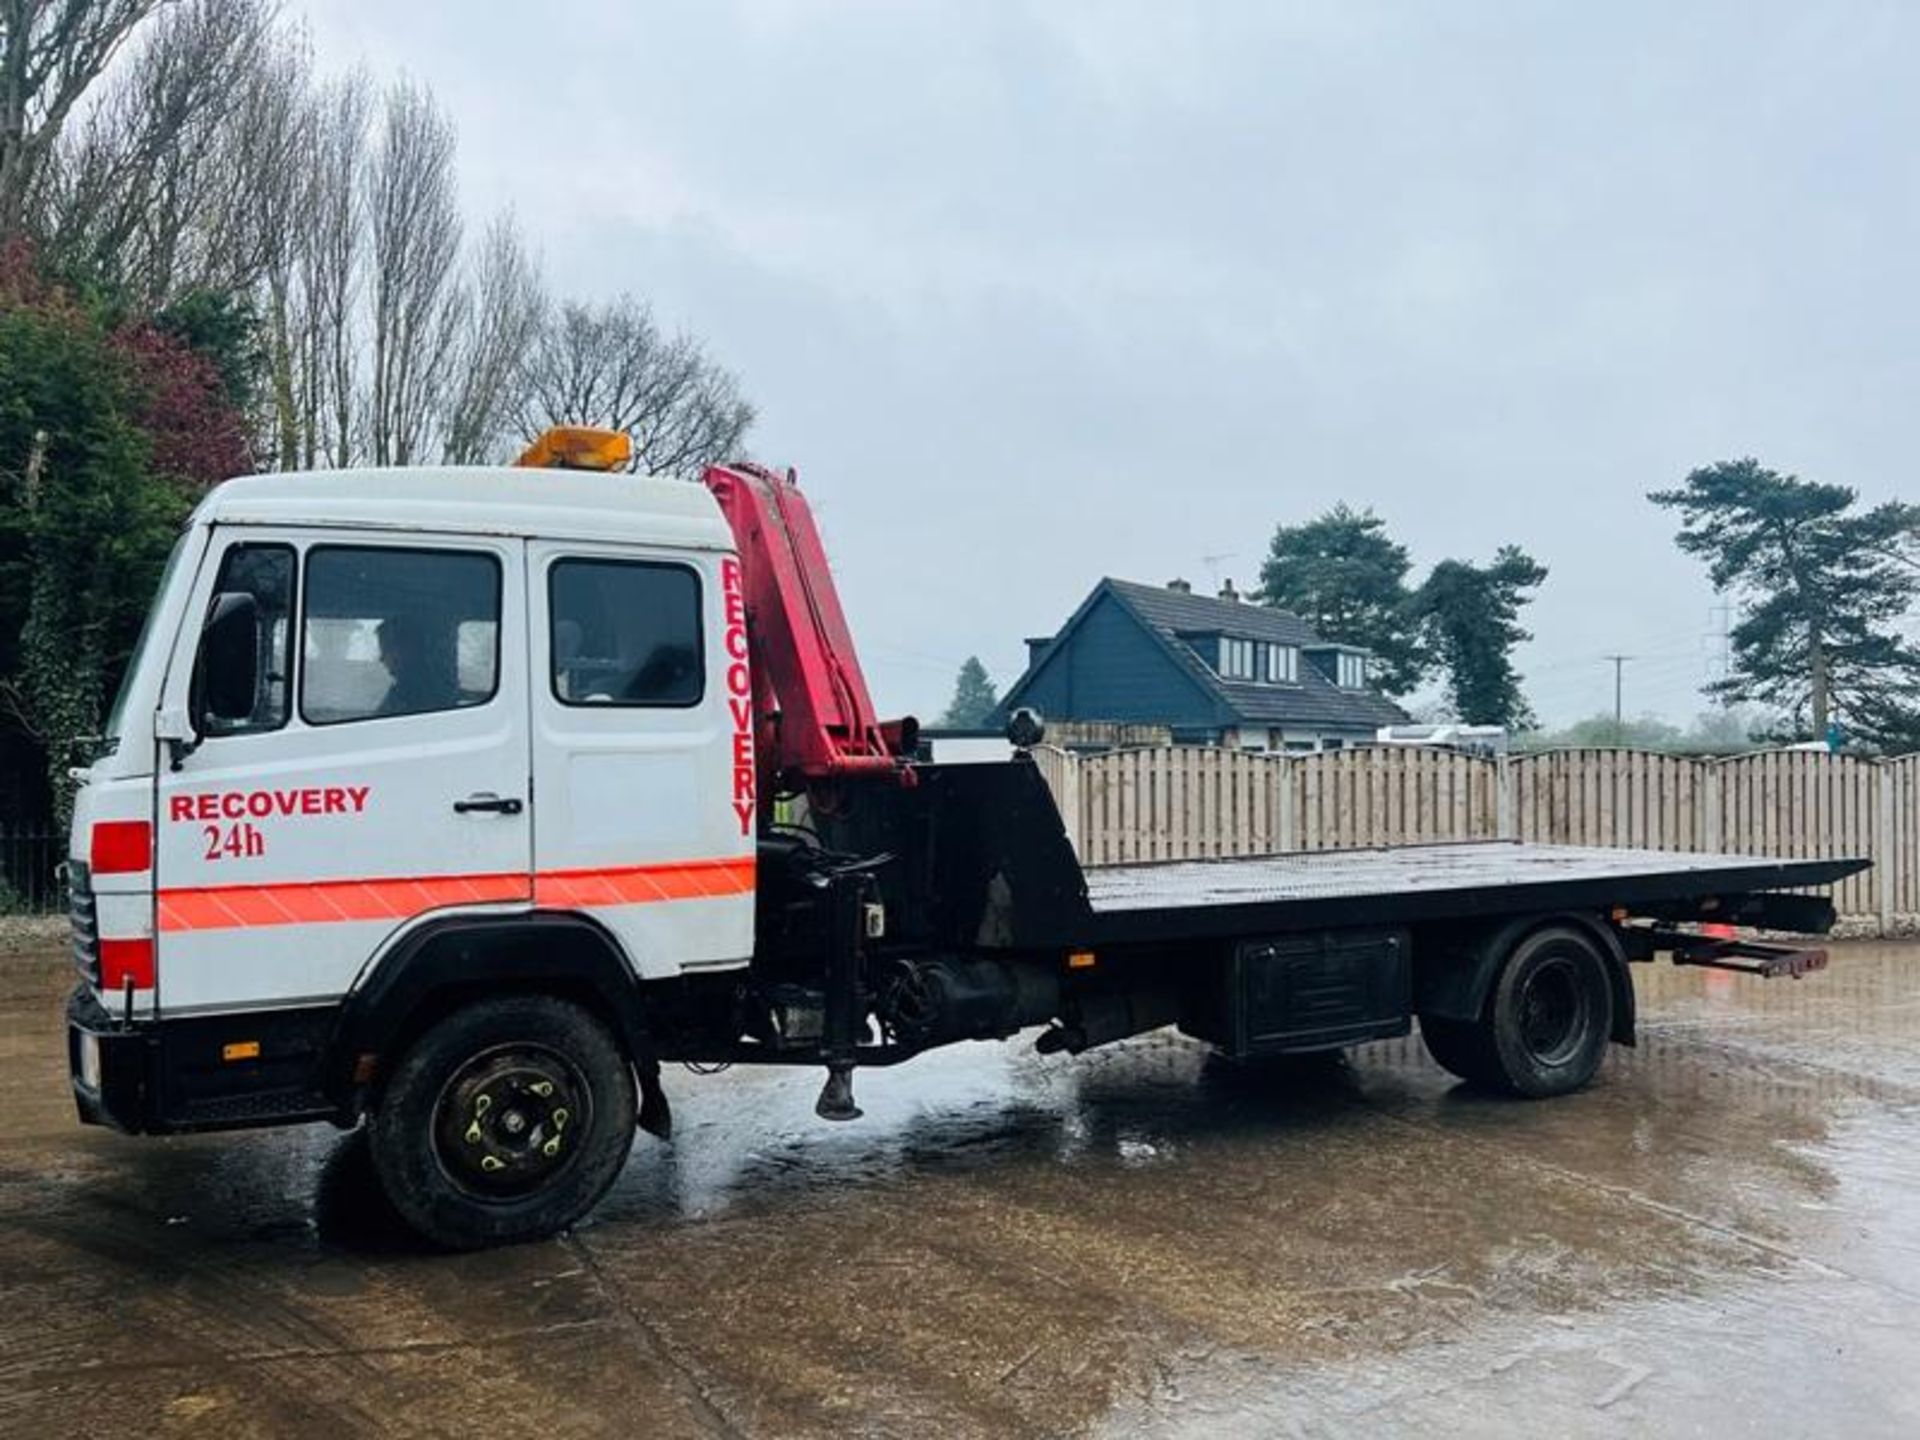 MERCEDES 814 4X2 CREW CAB RECOVERY LORRY C/W TILT AND SLIDE BODY & SPEC LIFT - Image 2 of 13